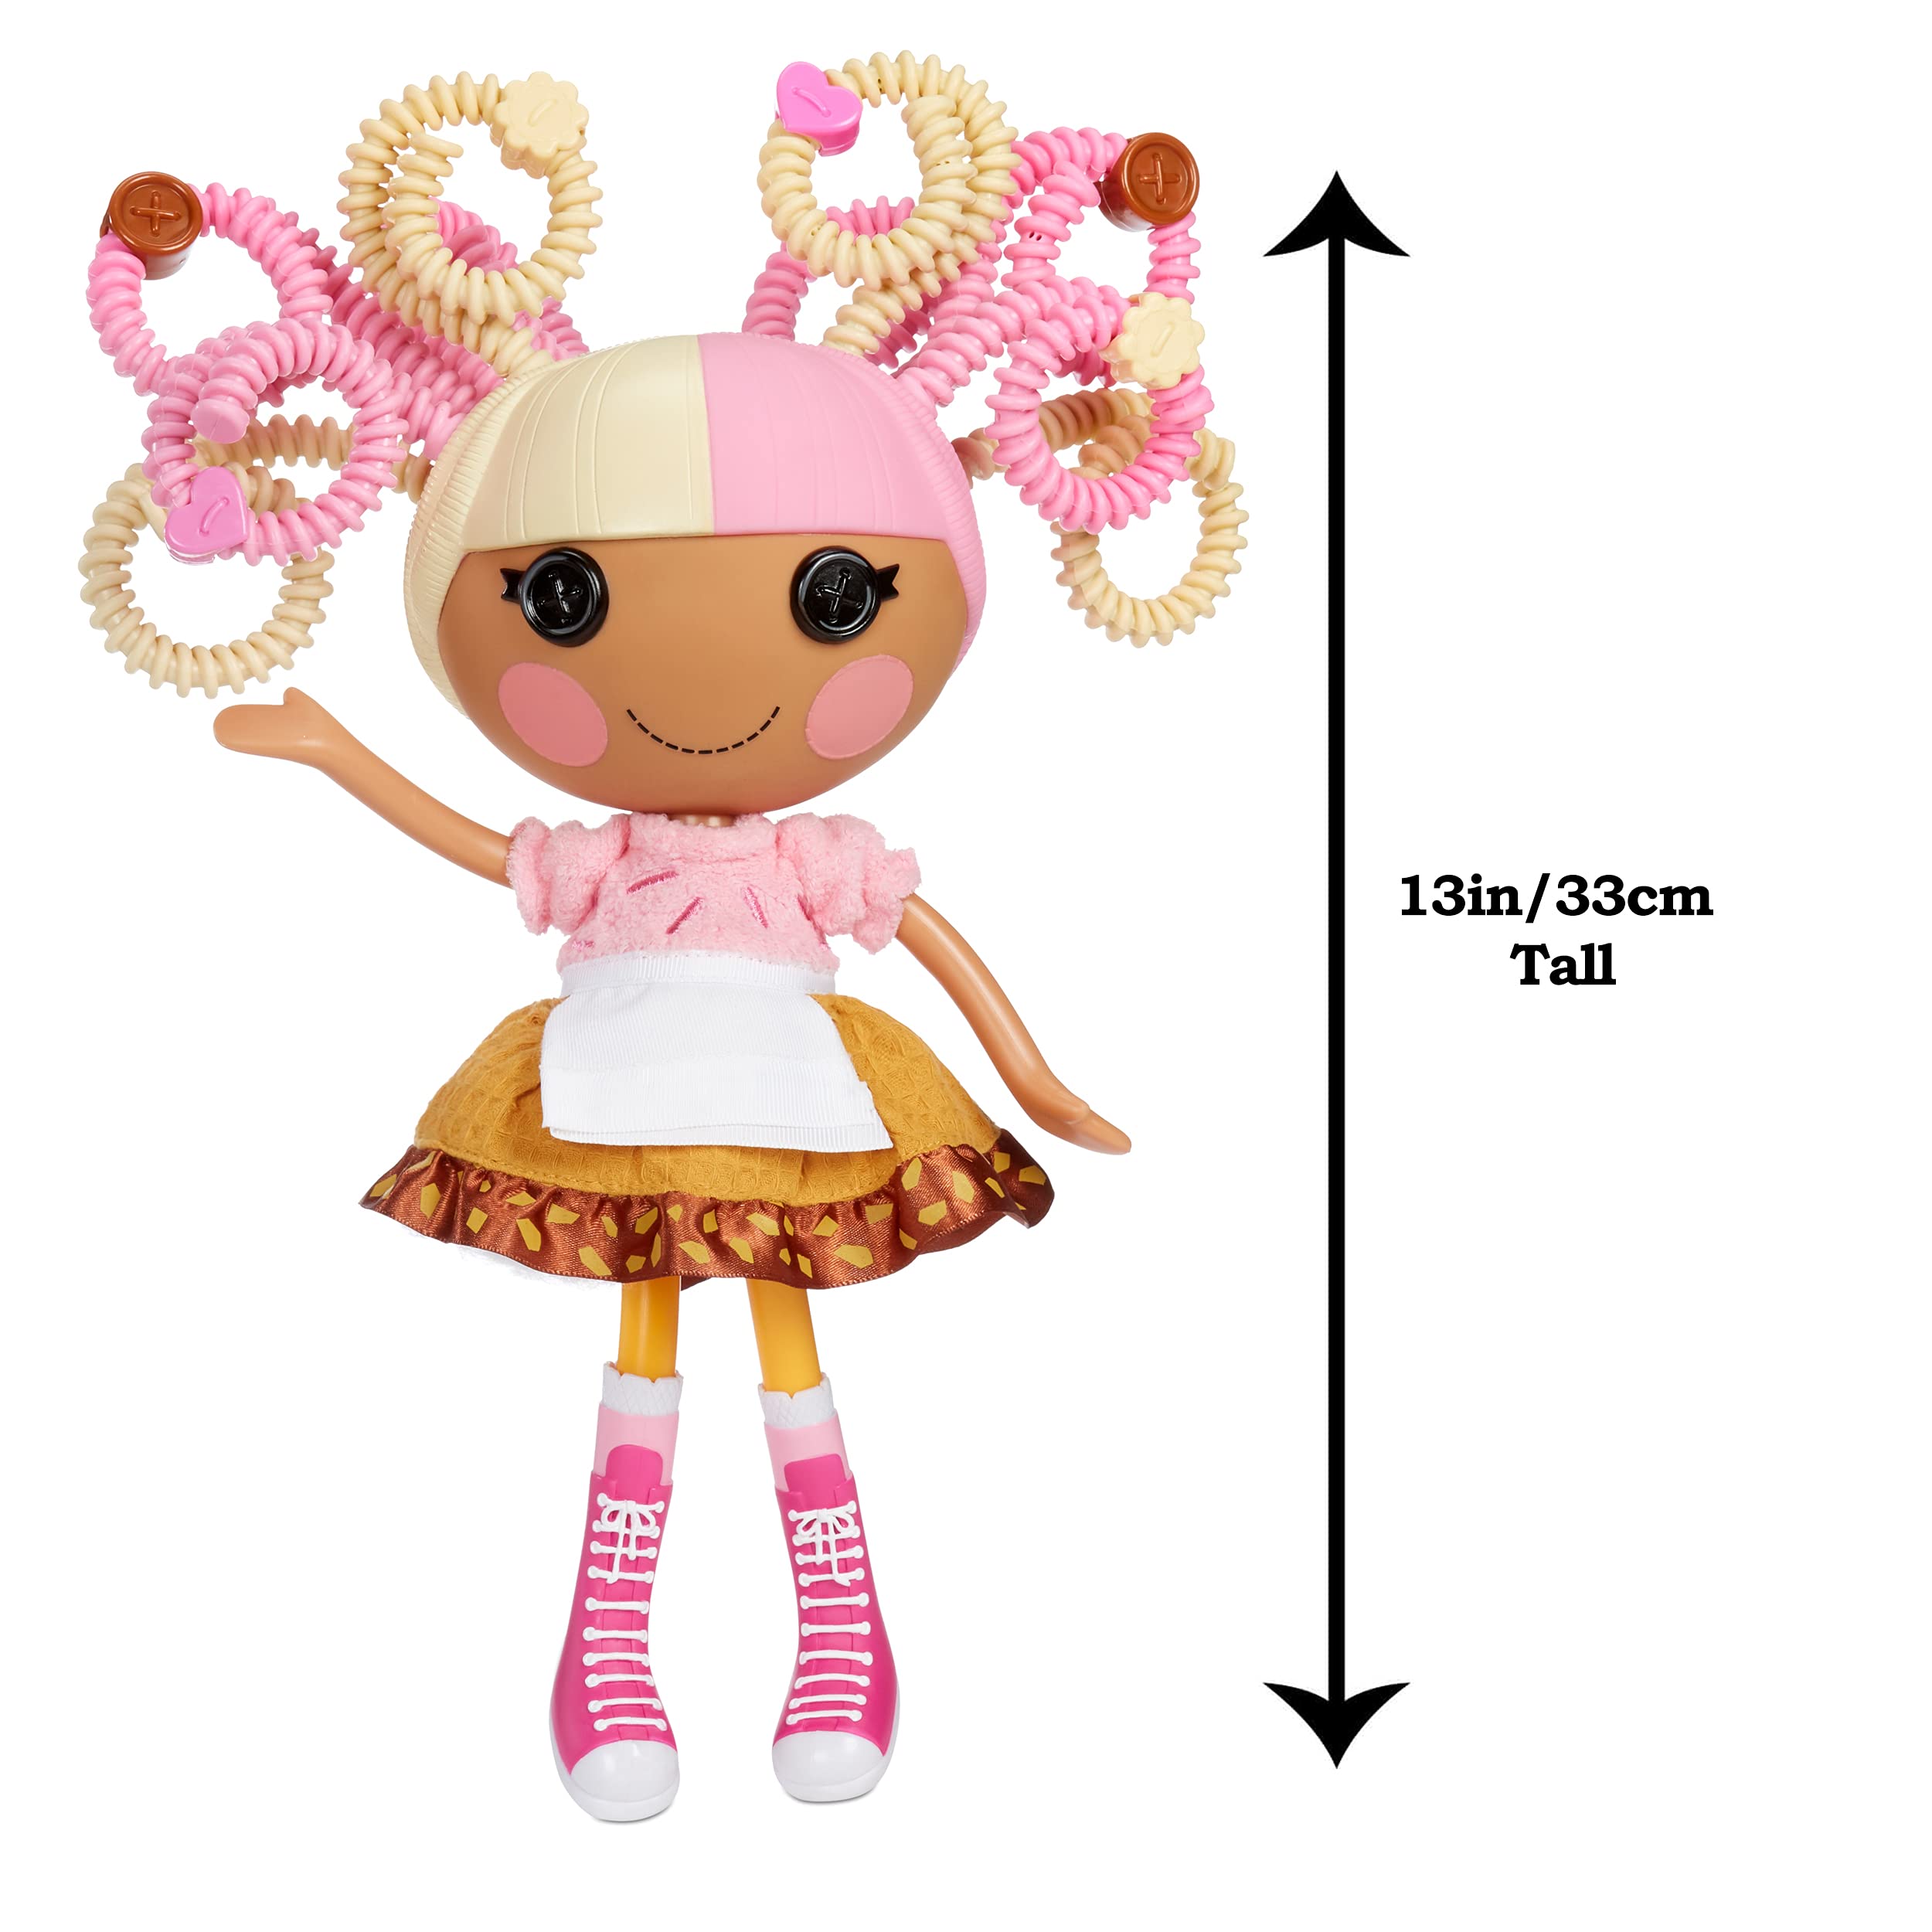 Lalaloopsy Silly Hair Doll- Scoops Waffle Cone Doll and Pet Cat, 13